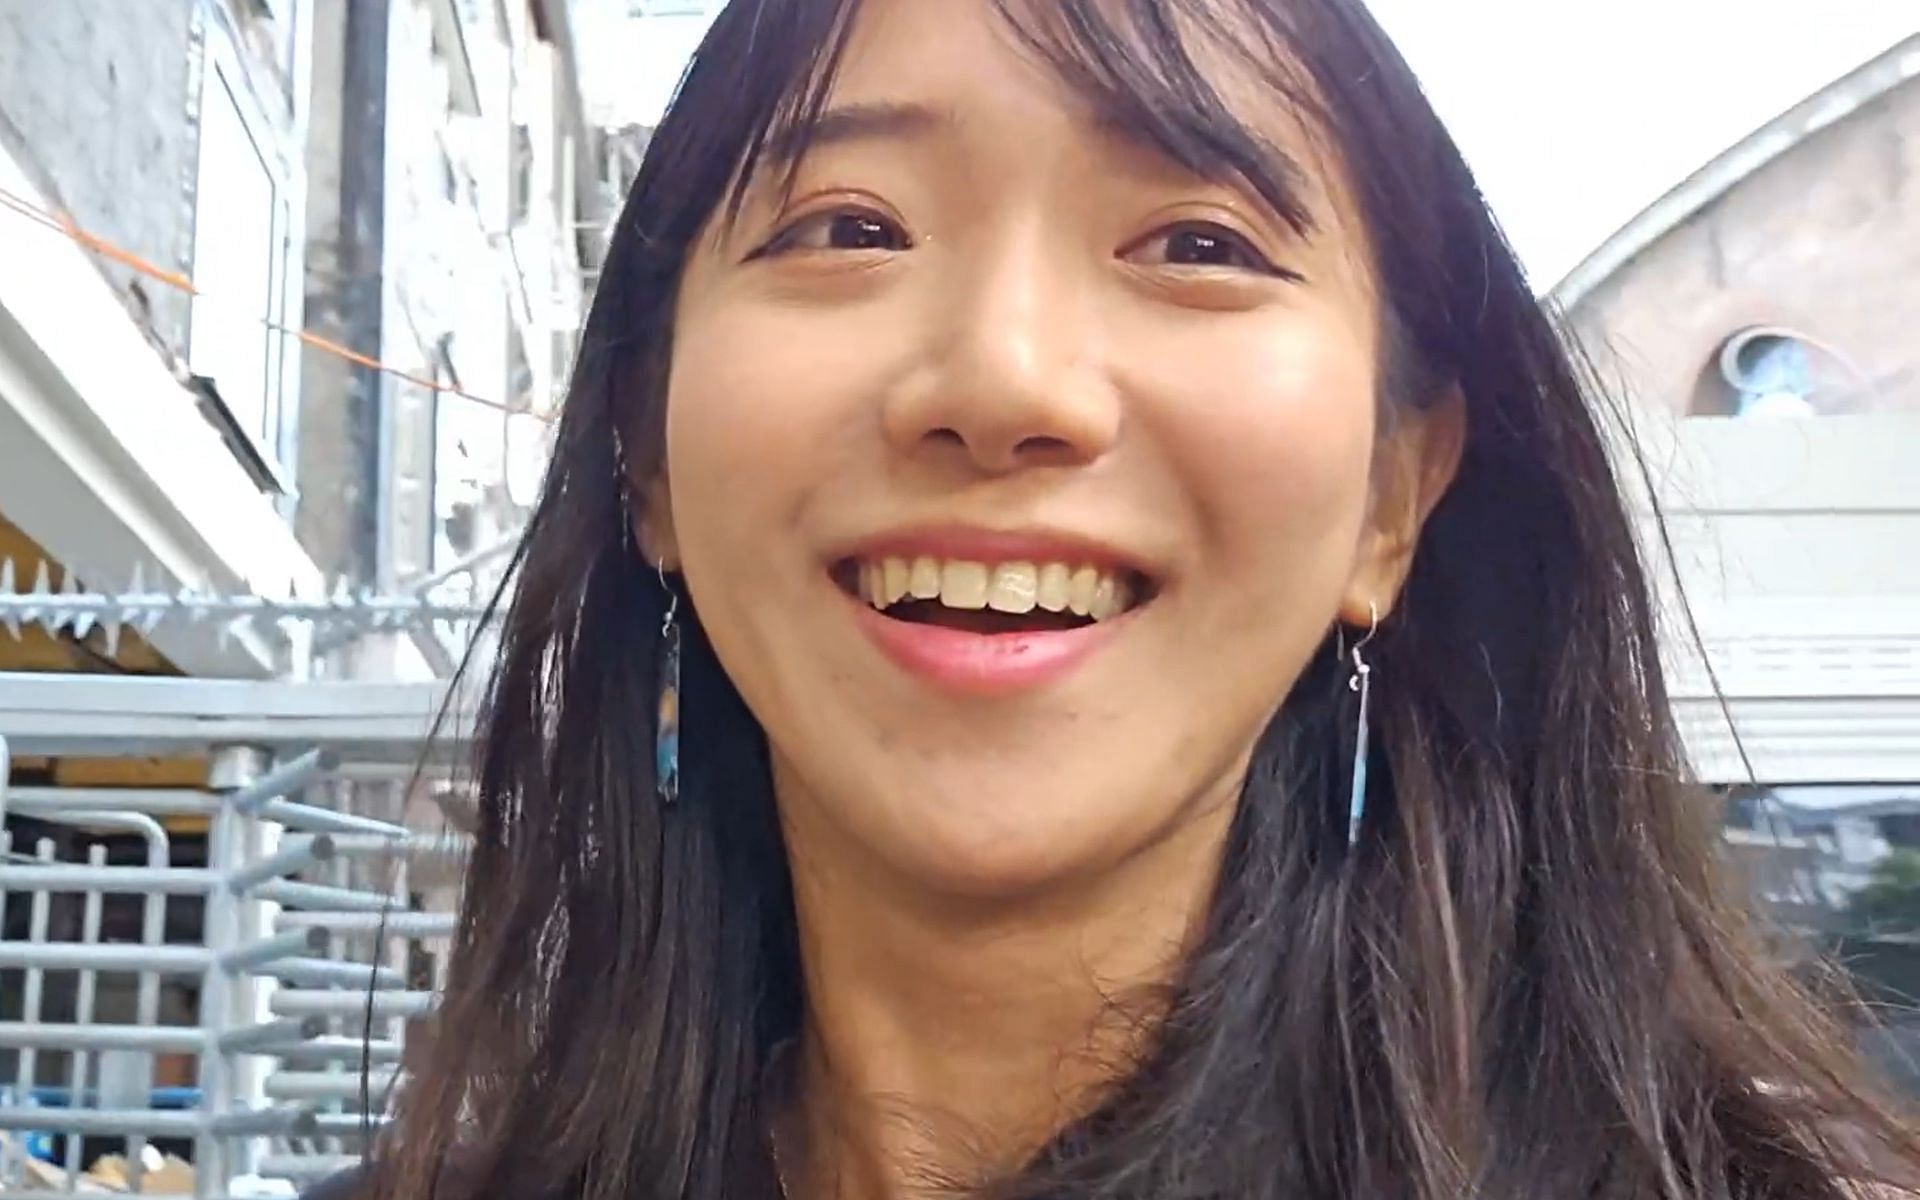 Twitch streamer Jinnytty was alerted after people tried to pickpocket her in Amsterdam (Image via Jinnytty/Twitch)